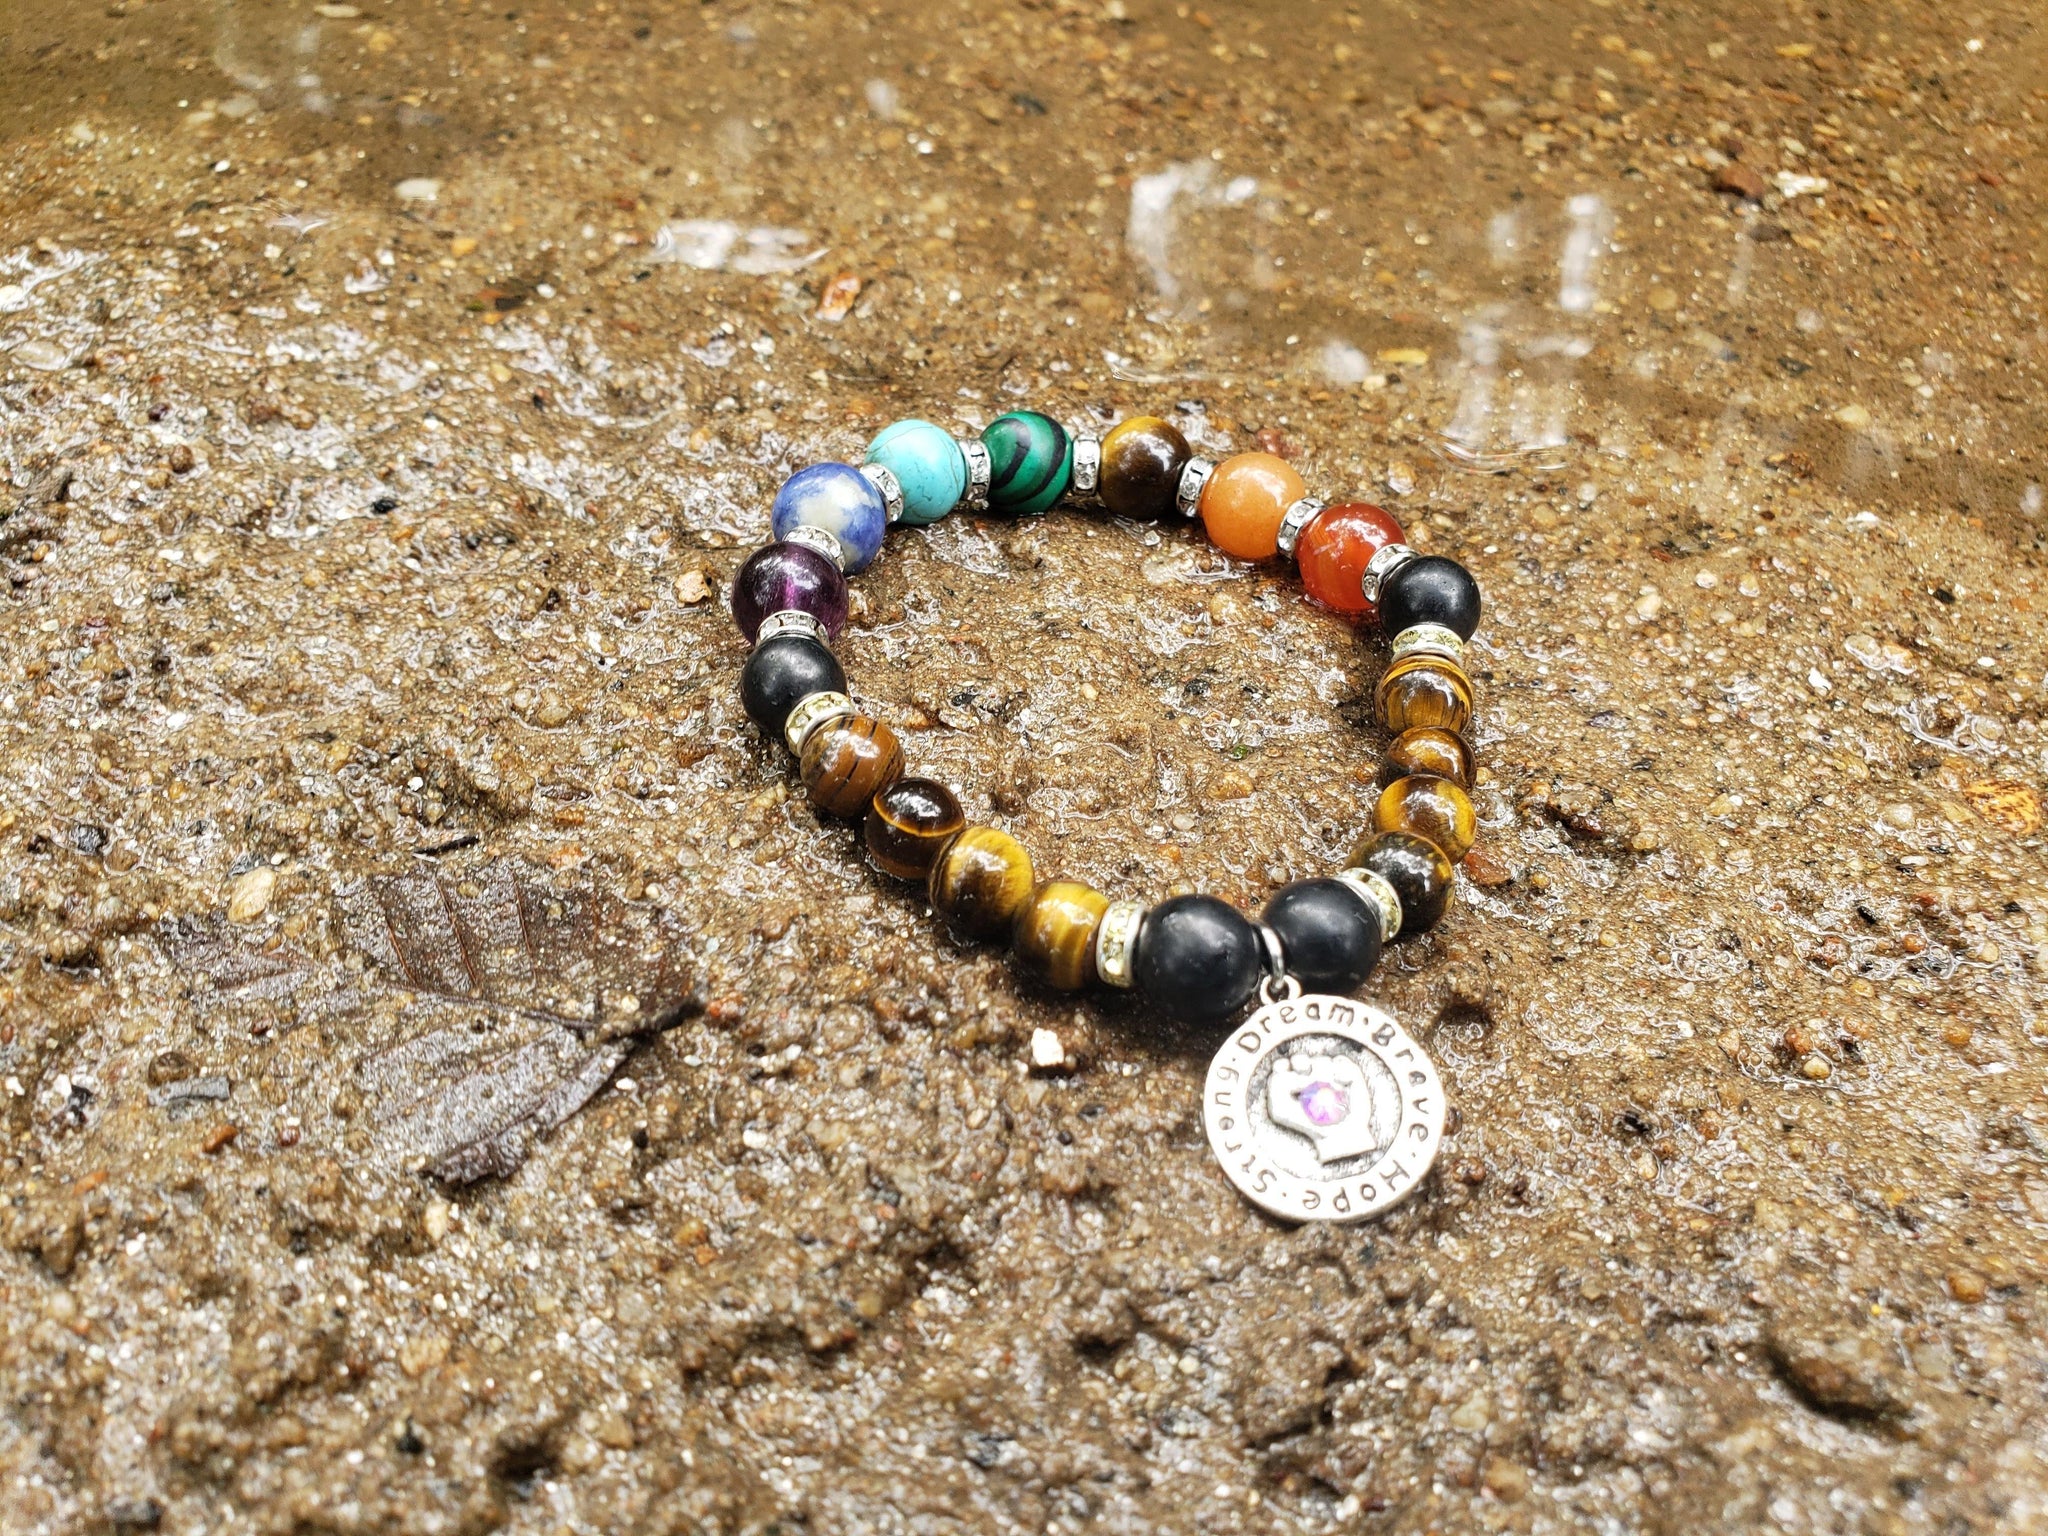 Buy Planets and Chakras Bracelets. Cosmic Energy. 8-10mm Size Natural  Stones. Handmade. Free Shipping Online in India - Etsy